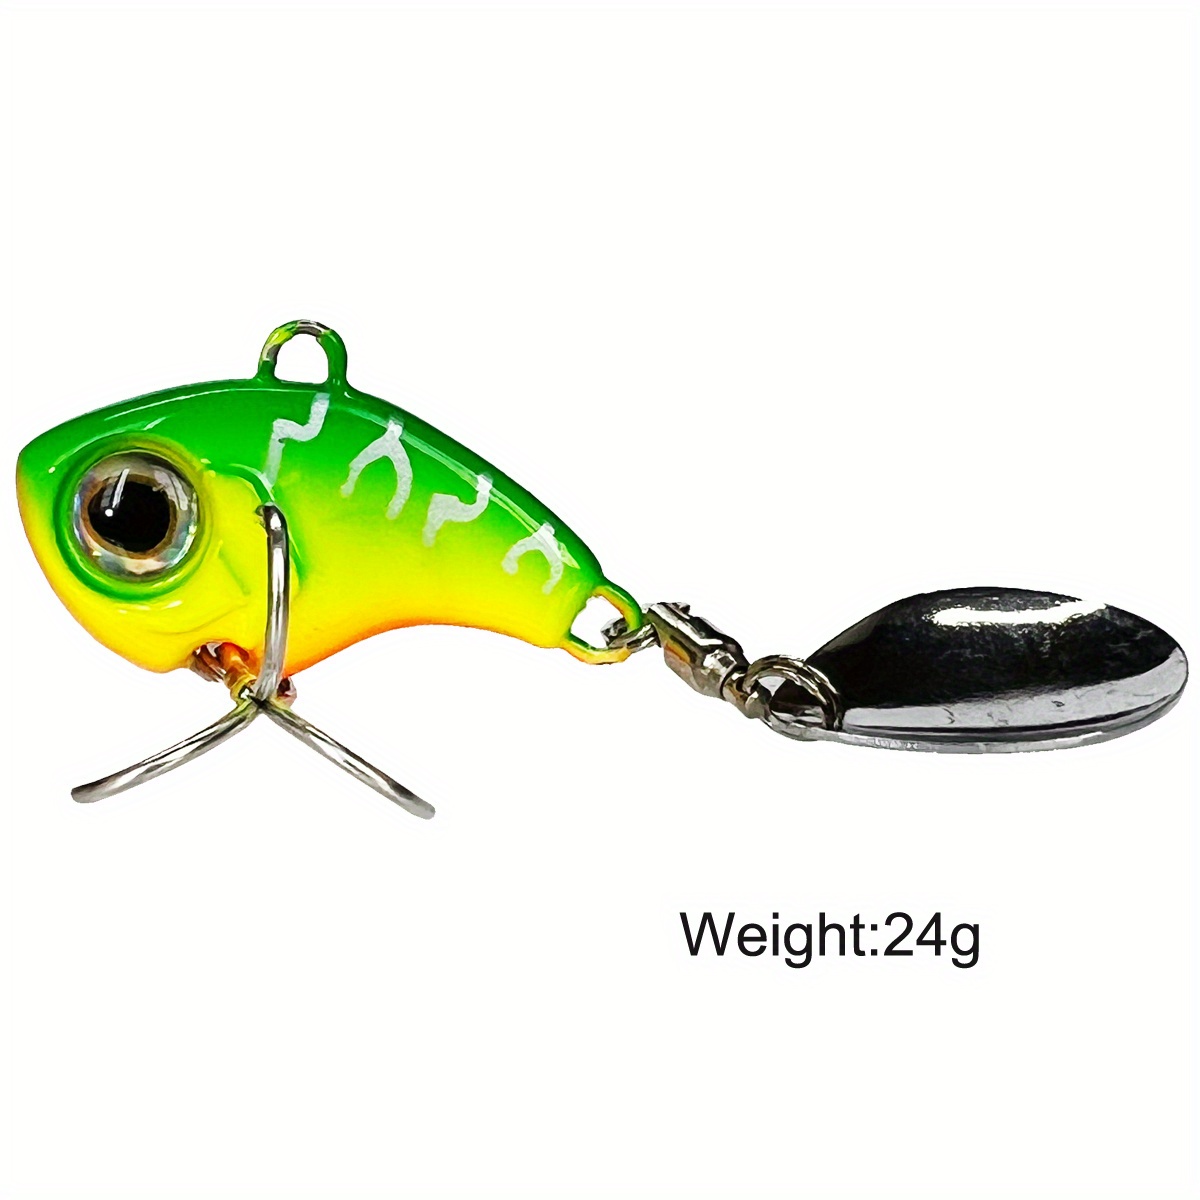 Bimoo 10pcs Fishing Metal Lure Spoon DIY Spinner Spoon Lures Frogs VIB  Reflective Accessories Sheet Noisy Spoons Fishing Tool - AliExpress